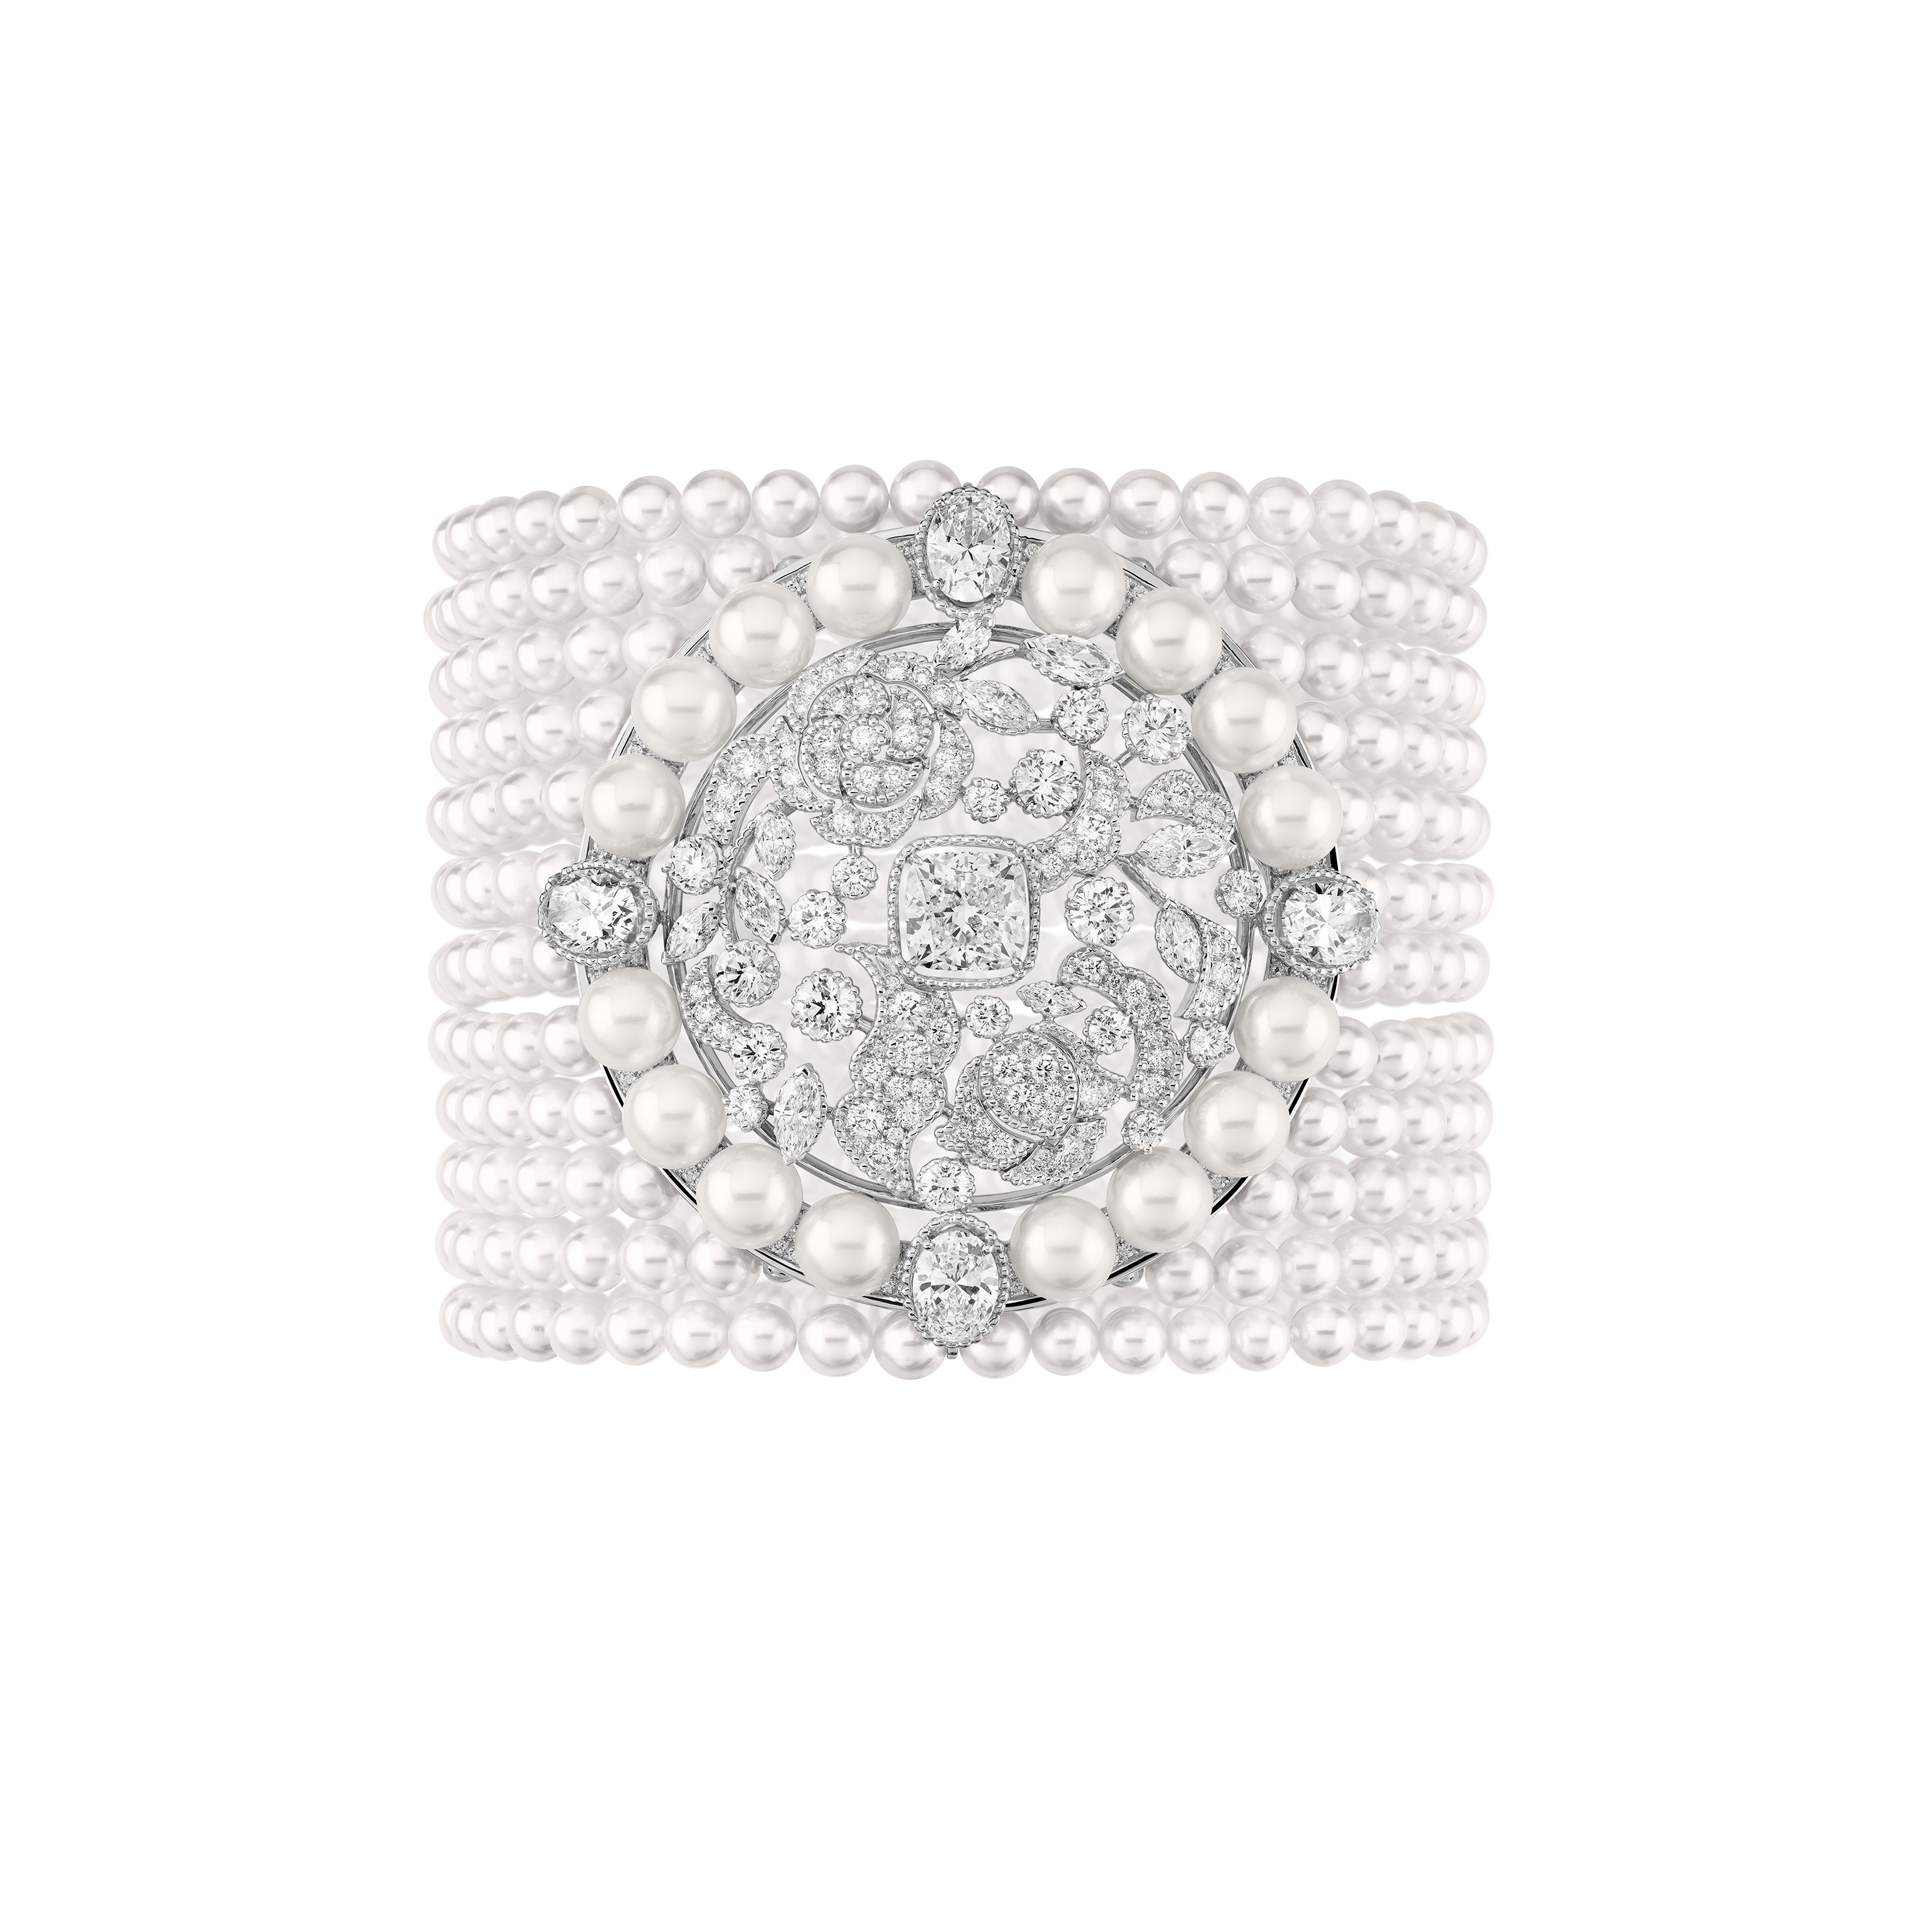 The Chanel Broderie Byzantine bracelet is one of many high jewellery pieces using pearls. Photos: Handouts